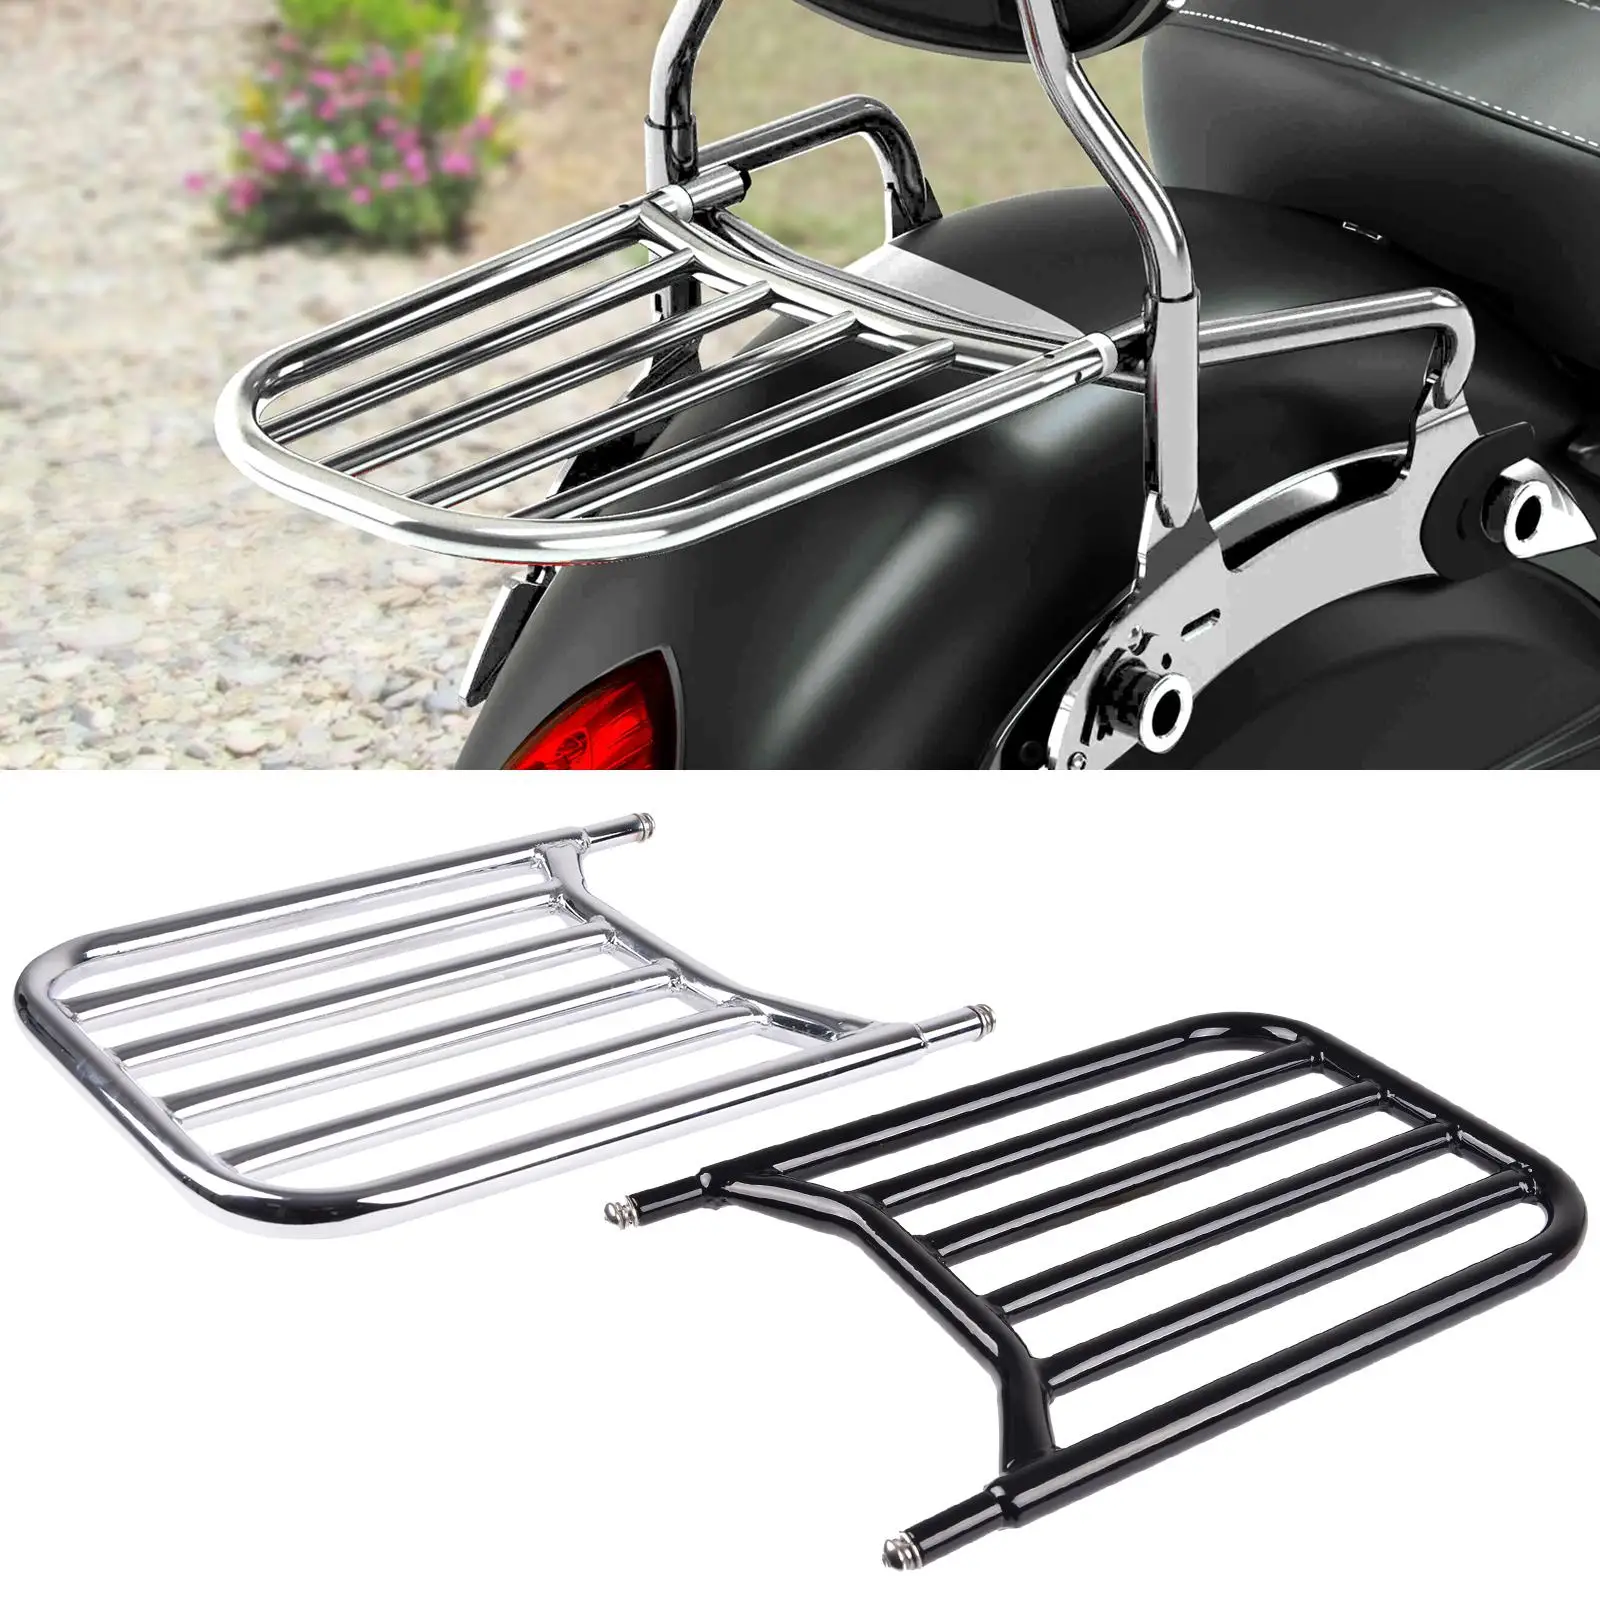 Backrest Sissy Bar Cargo Carrier Replacement Luggage Rack for Indian Chieftain